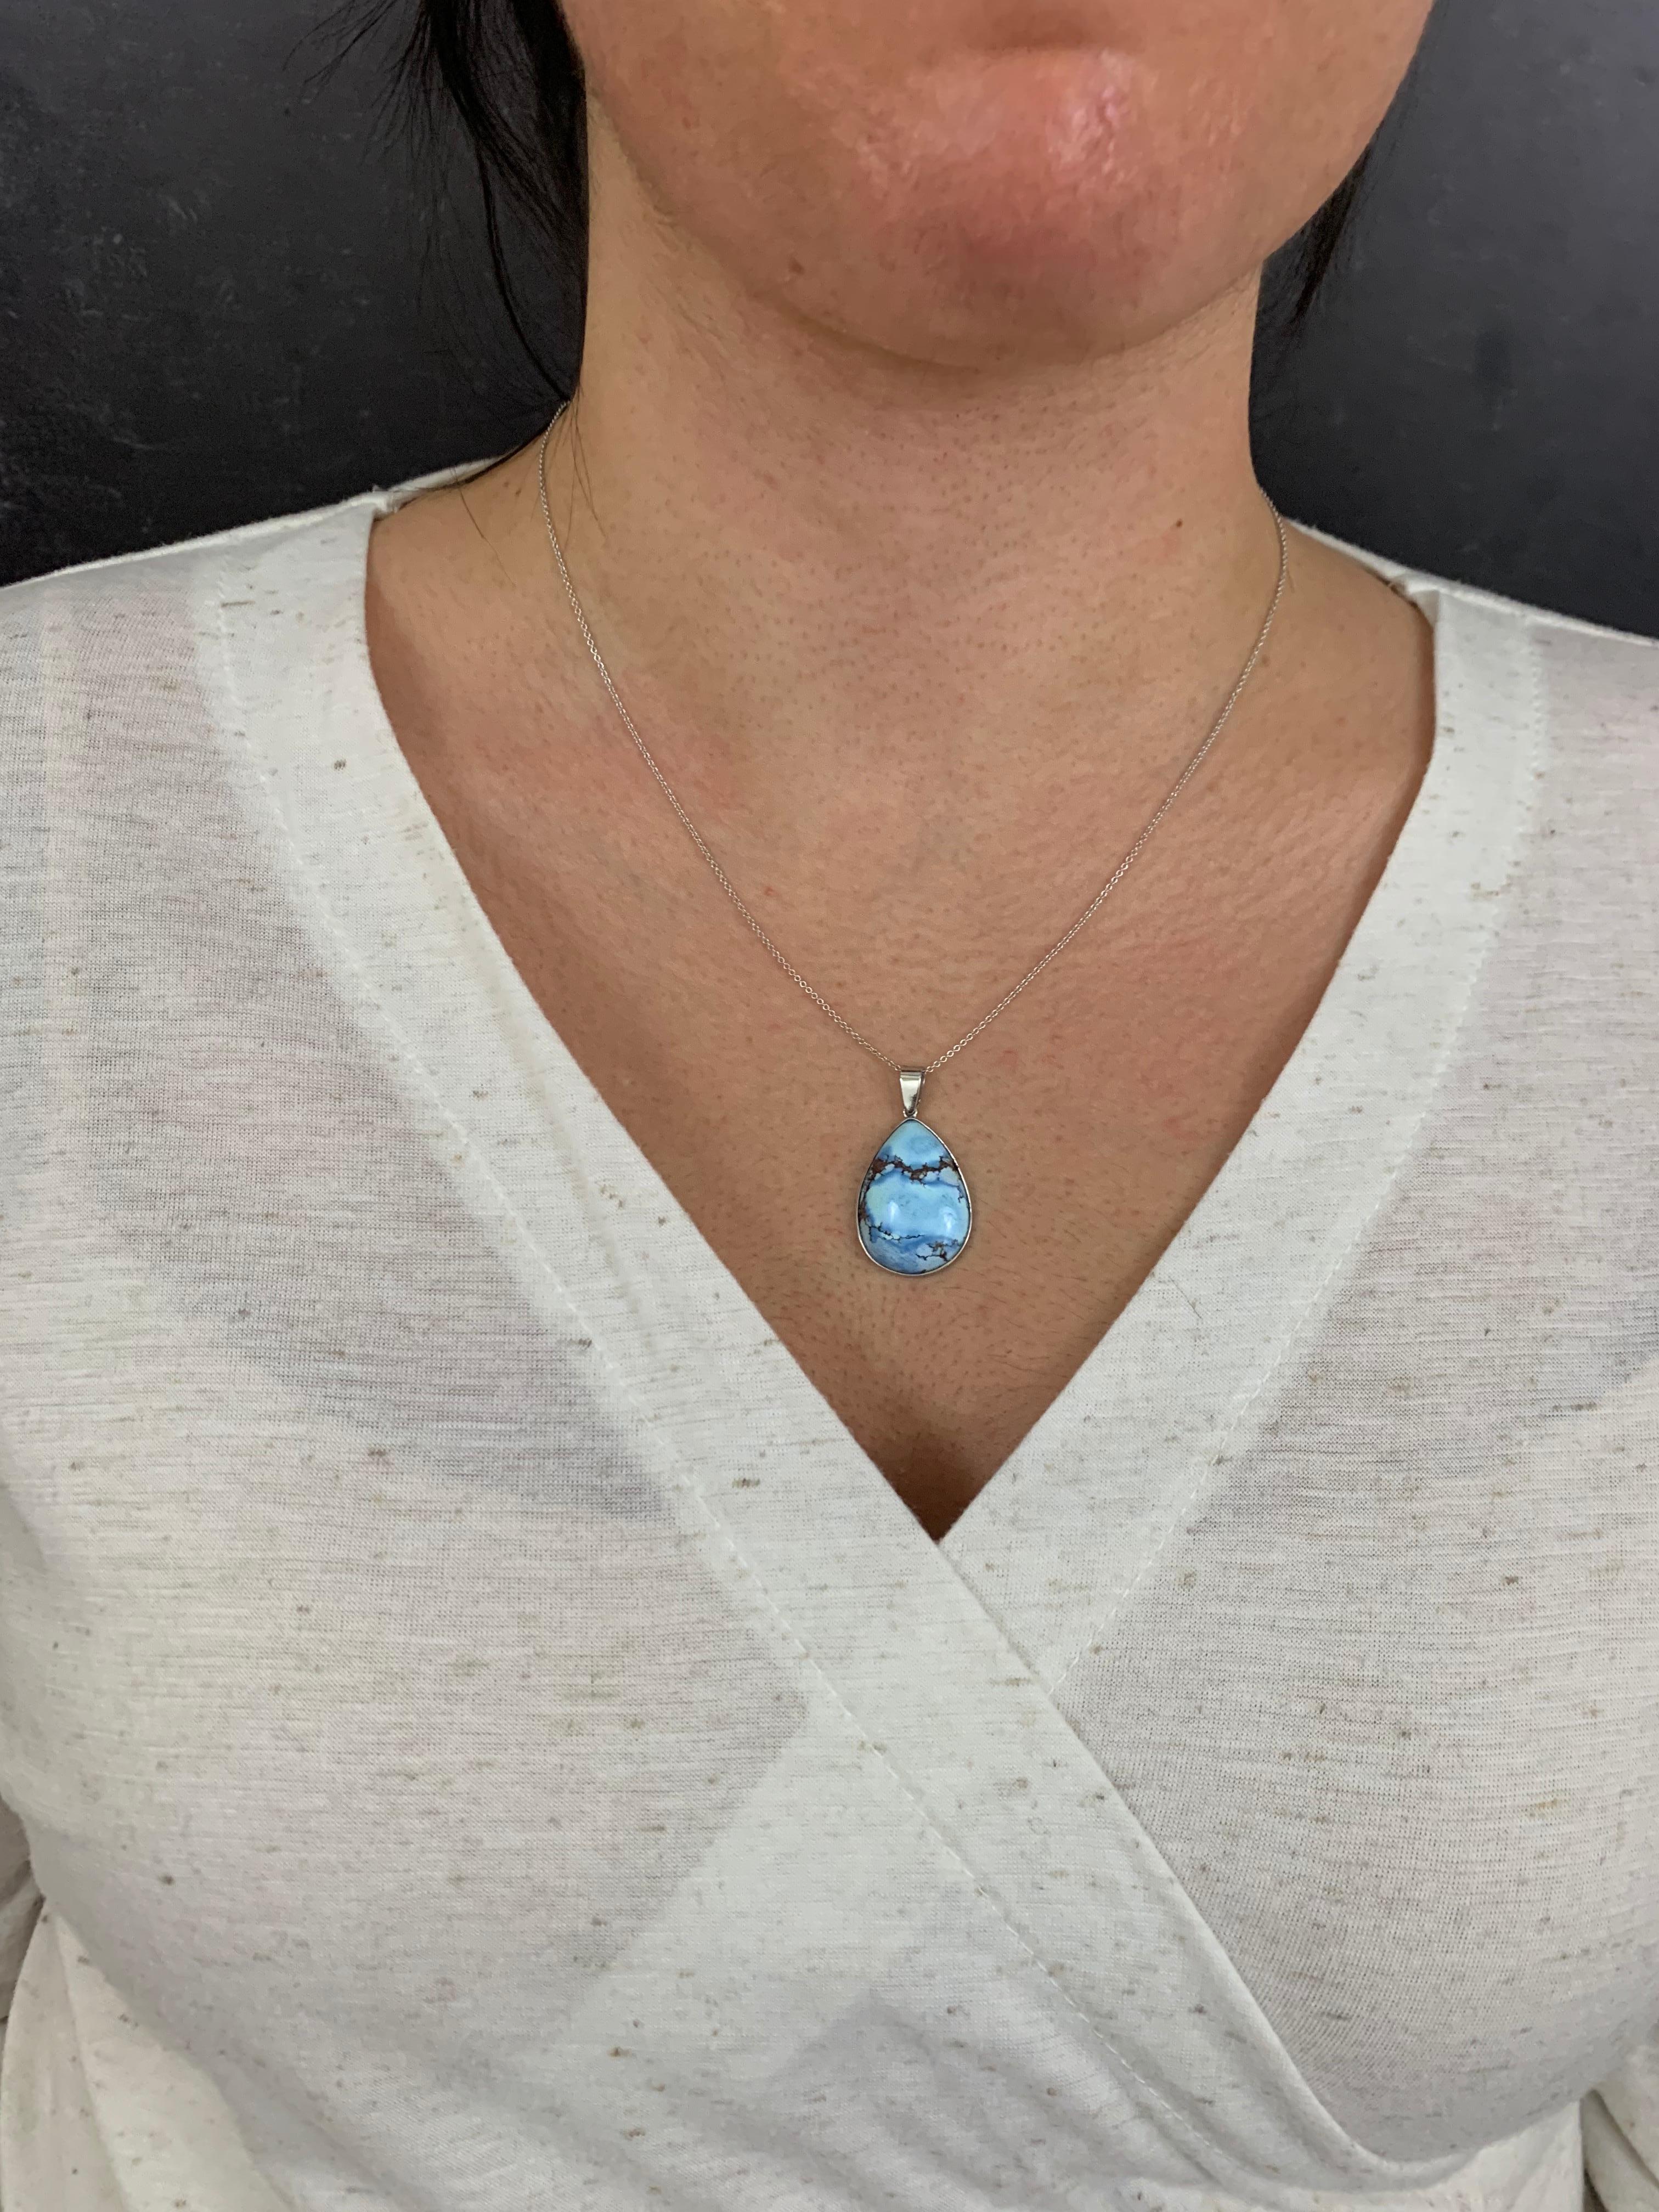 14K White Gold
1 Pear Shaped Turquoise at 15.92 Carats - Measuring 18 x 26 mm

Fine one-of-a-kind craftsmanship meets incredible quality in this breathtaking piece of jewelry. 

All pieces are made in the U.S.A and come with a lifetime warranty!